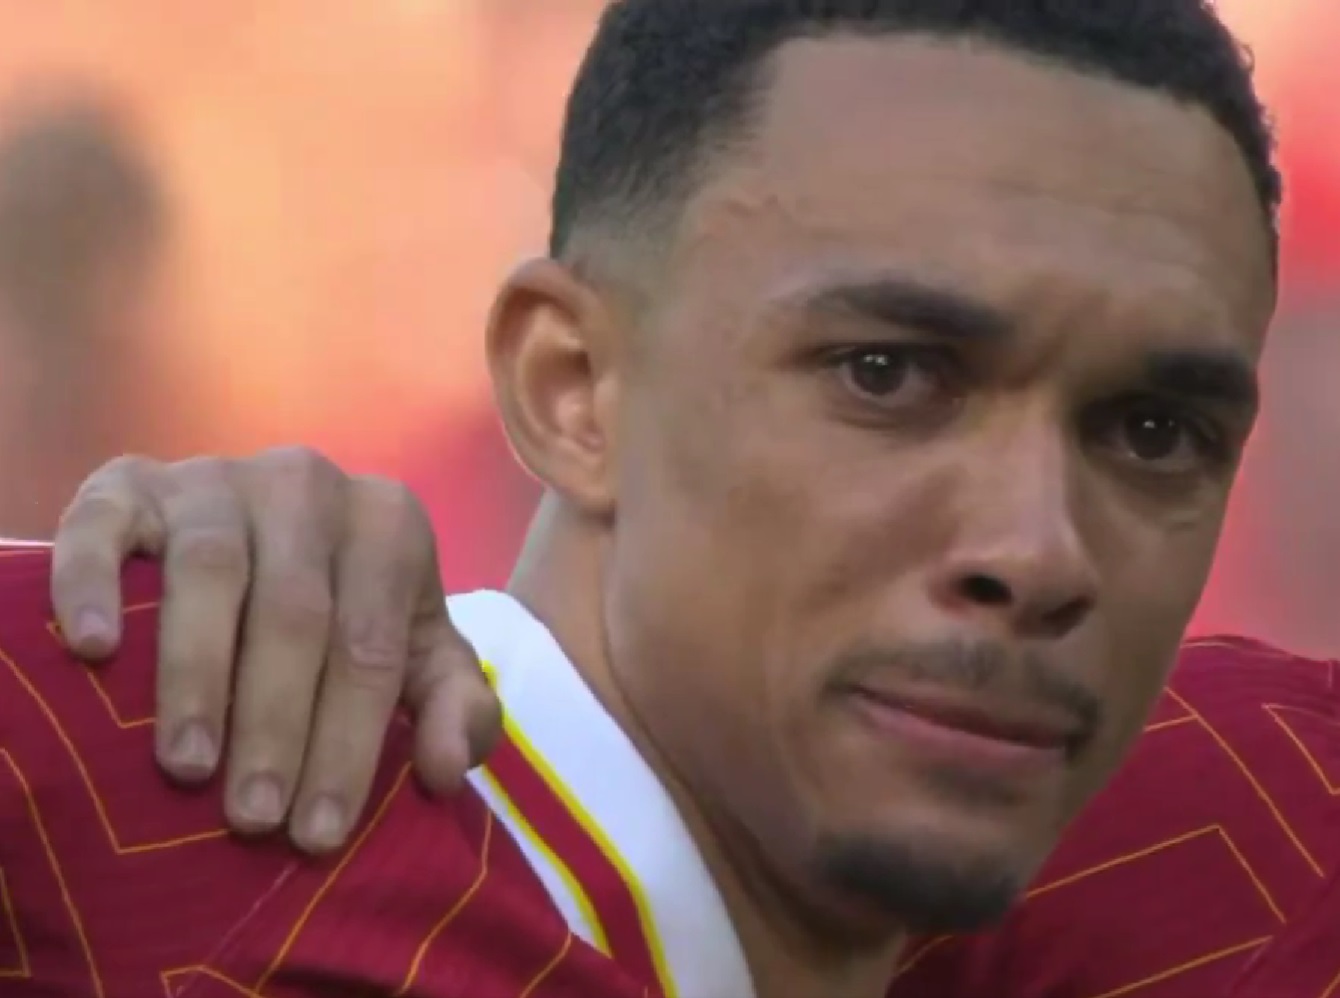 (Video) Trent Alexander-Arnold in bits and pieces during magical YNWA for Klopp